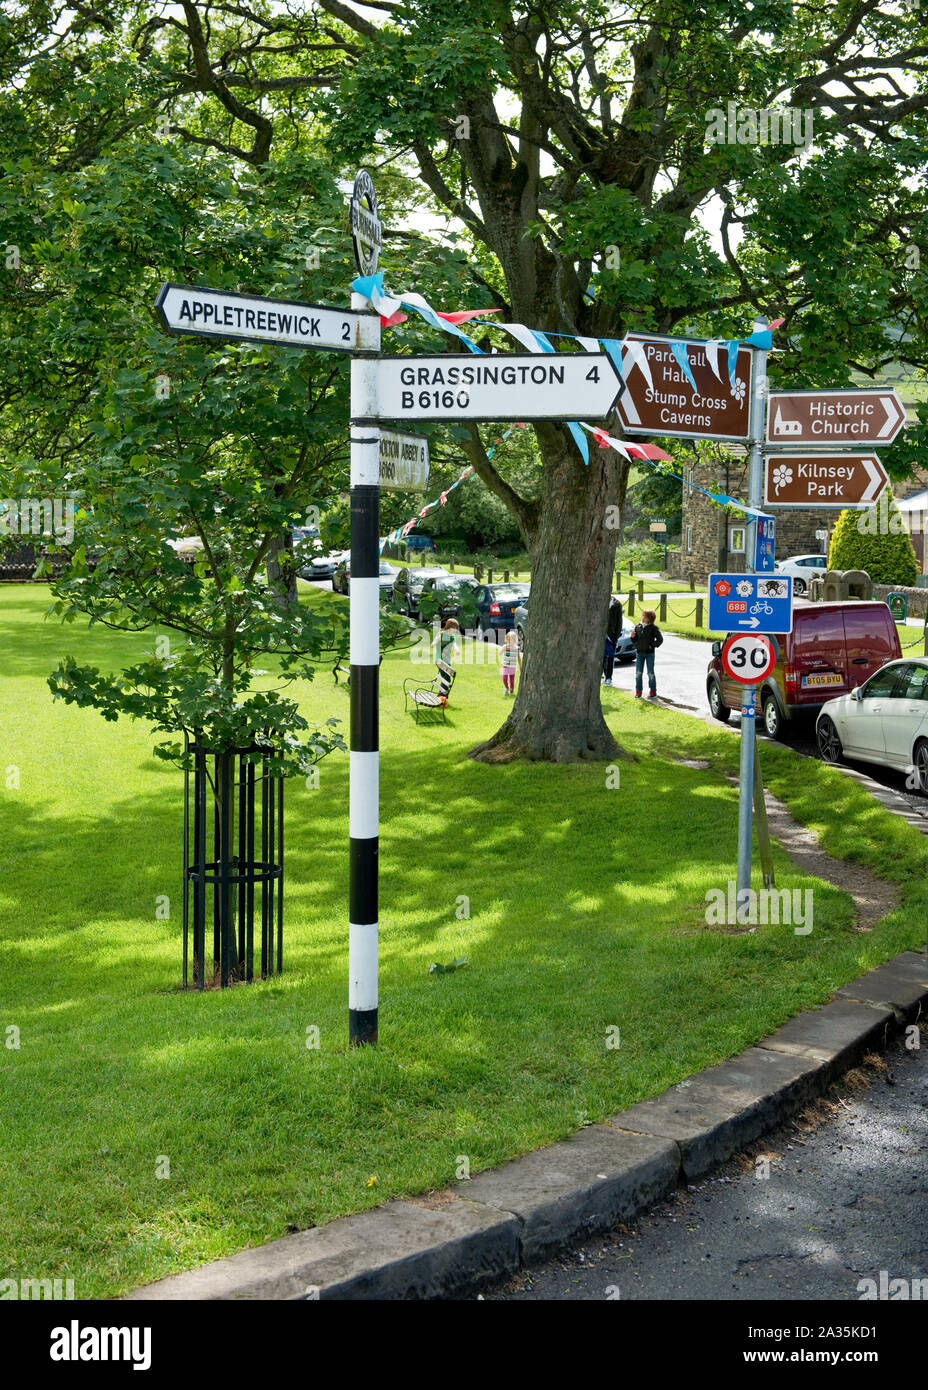 Road sign for Grassington, Appletrewick, Kilnsey Park and Stump Cross Caverns. North Yorkshire Dales National Park. North Yorkshire Stock Photo